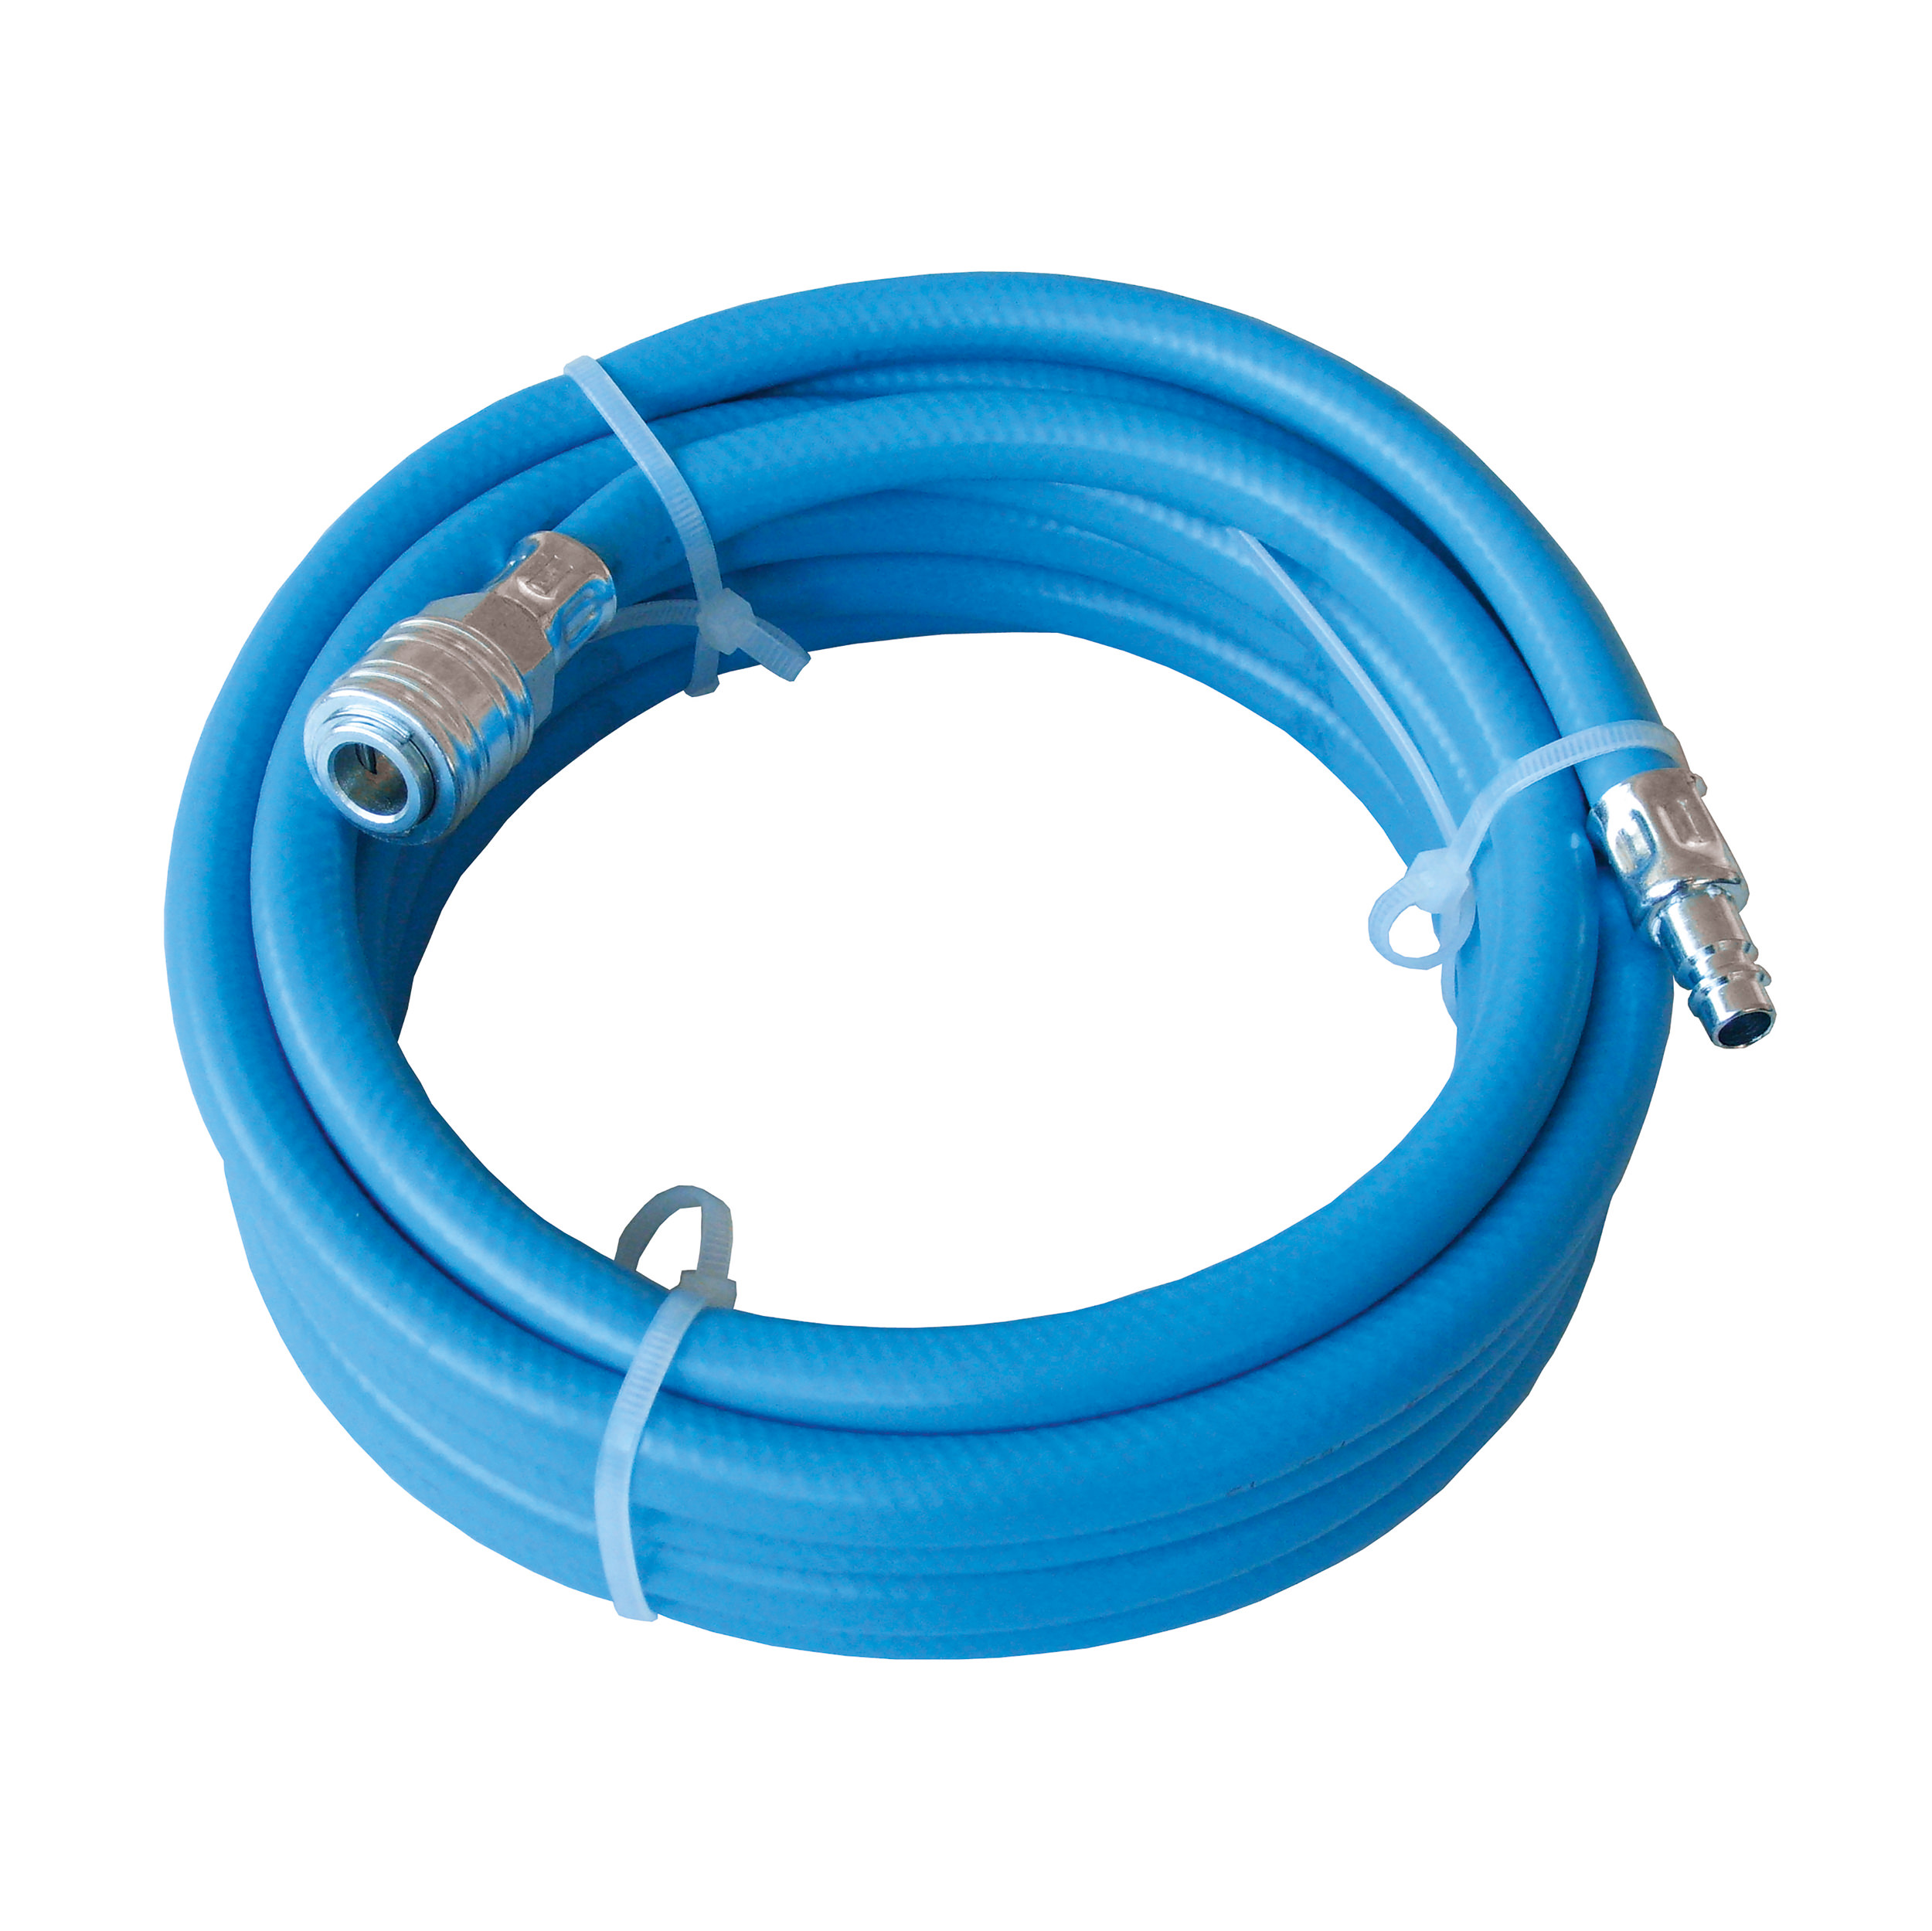 PVC compressed air hose SOFT, Ø9 × 2,75 mm, MBR: 32 mm, L: 5 m, assembled completely with a DN 7.2 coupling and steel plug